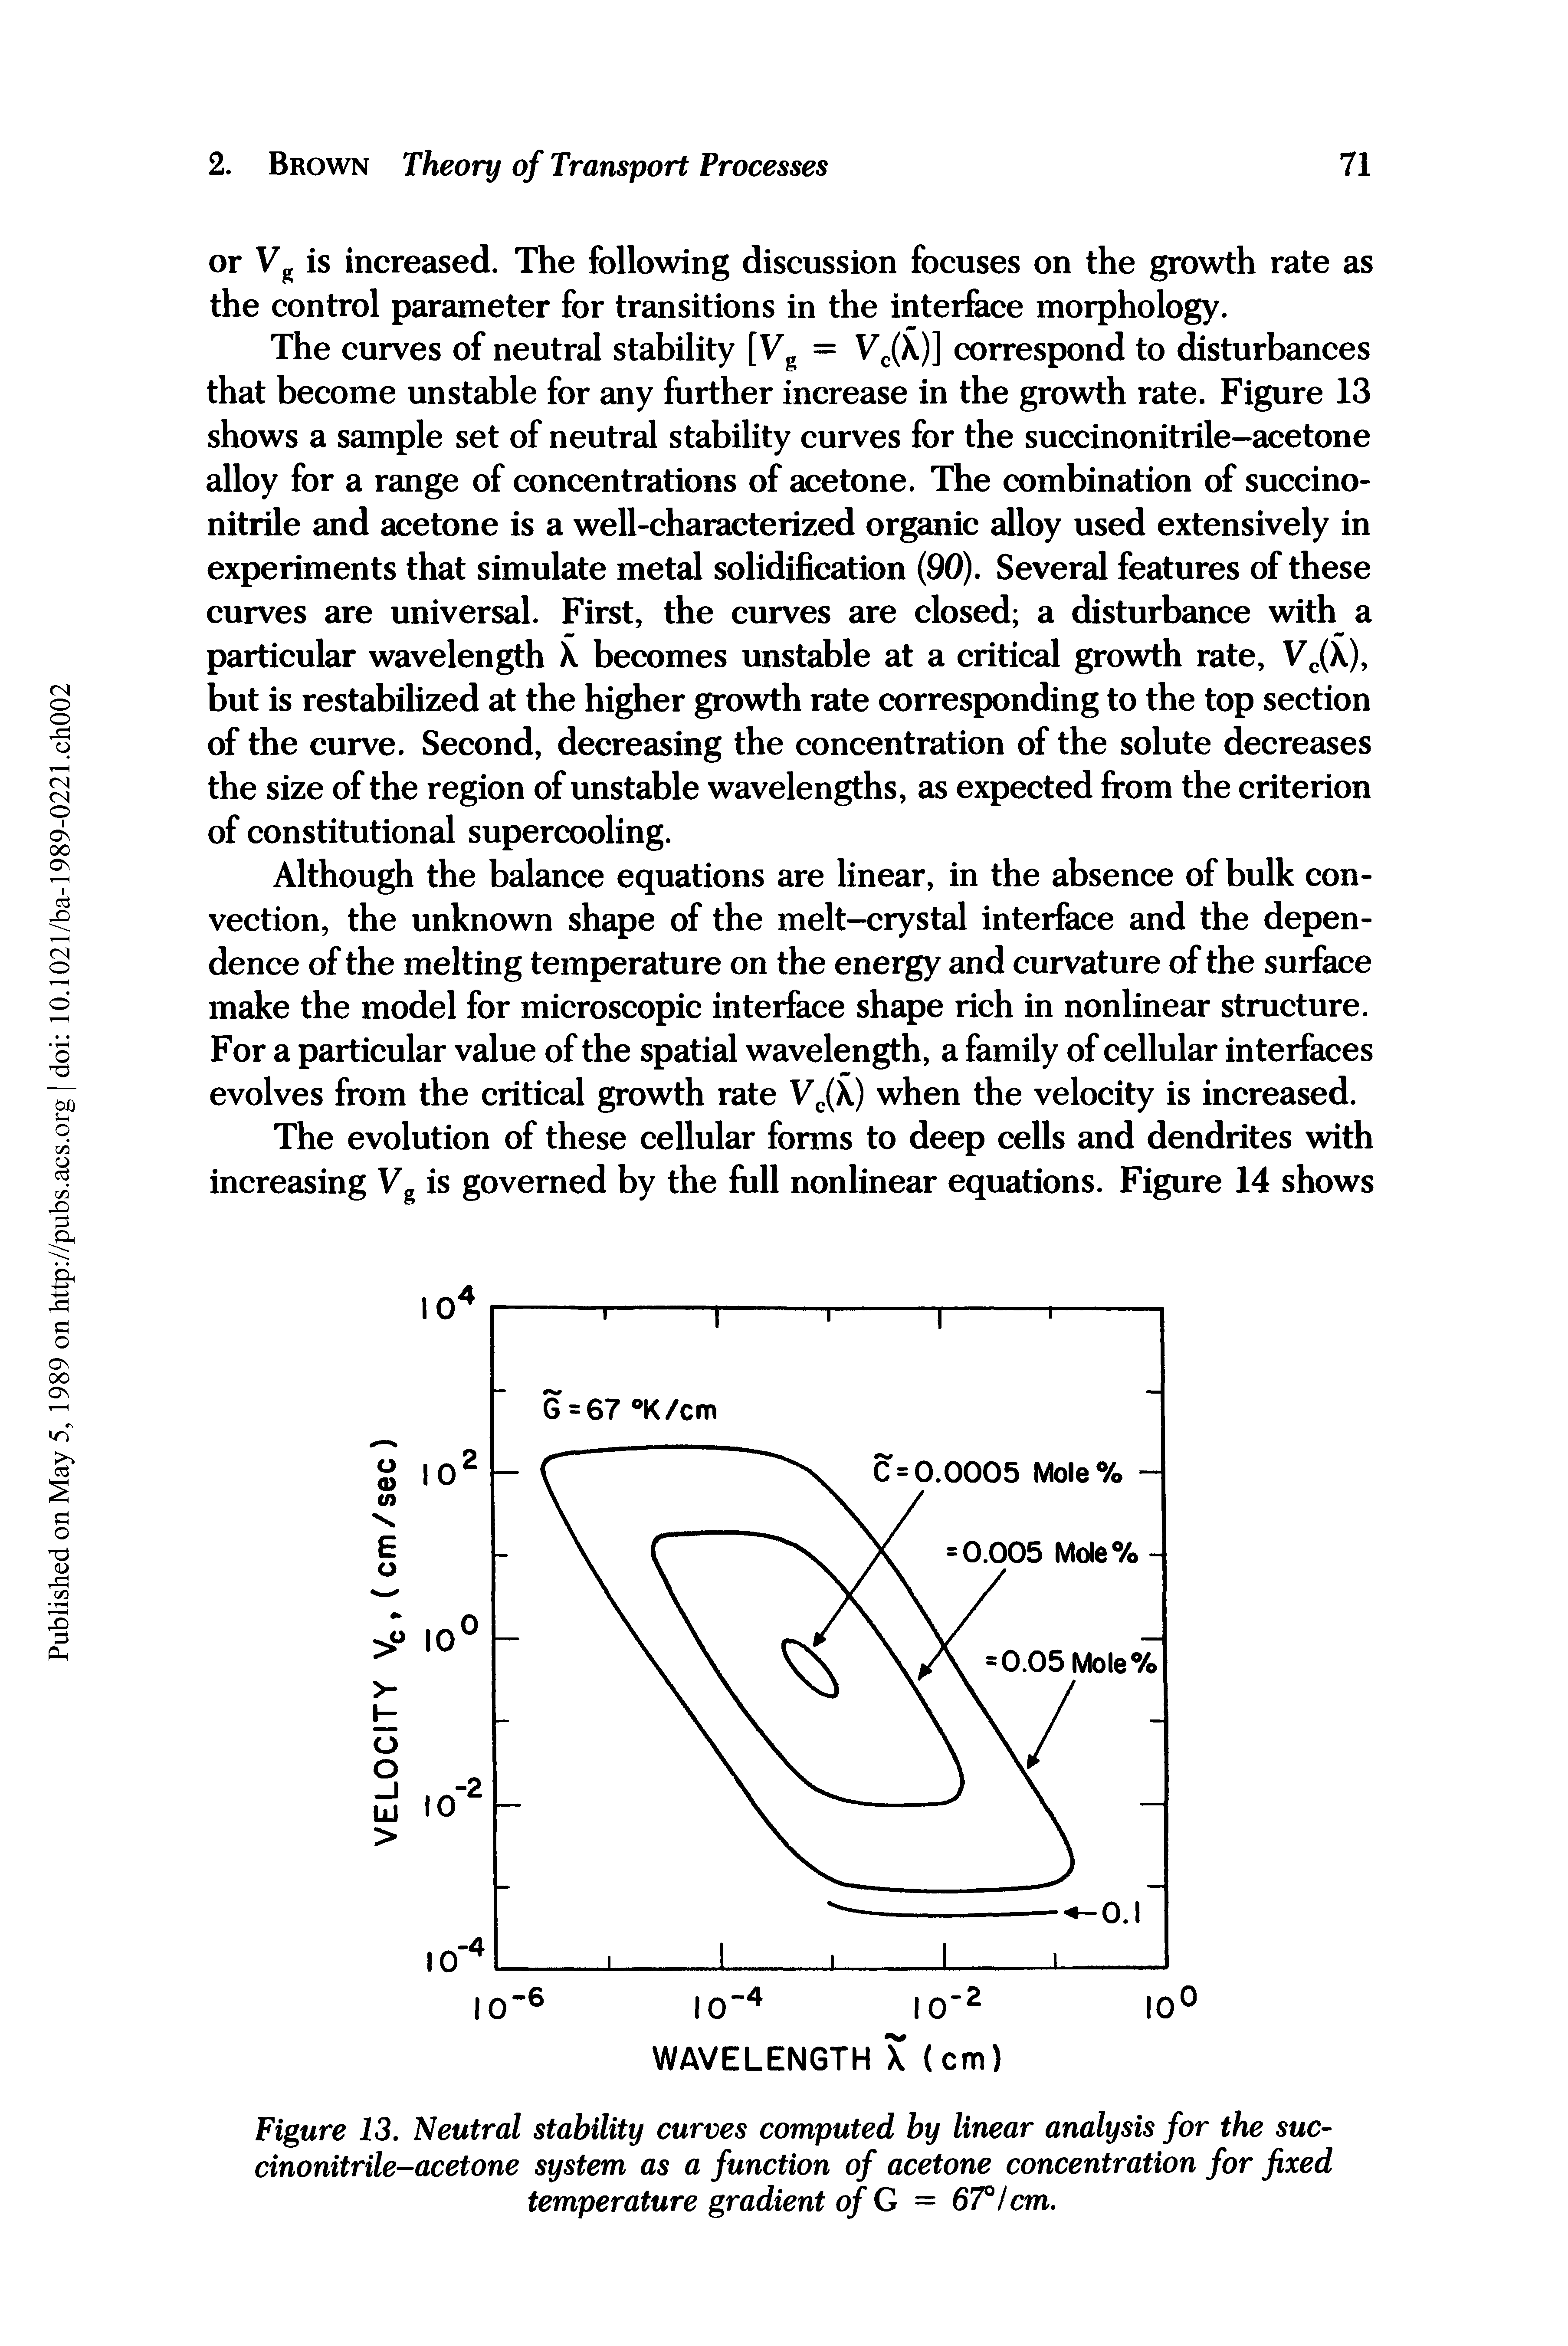 Figure 13. Neutral stability curves computed by linear analysis for the succinonitrile-acetone system as a function of acetone concentration for fixed temperature gradient of G = 67°/cm.